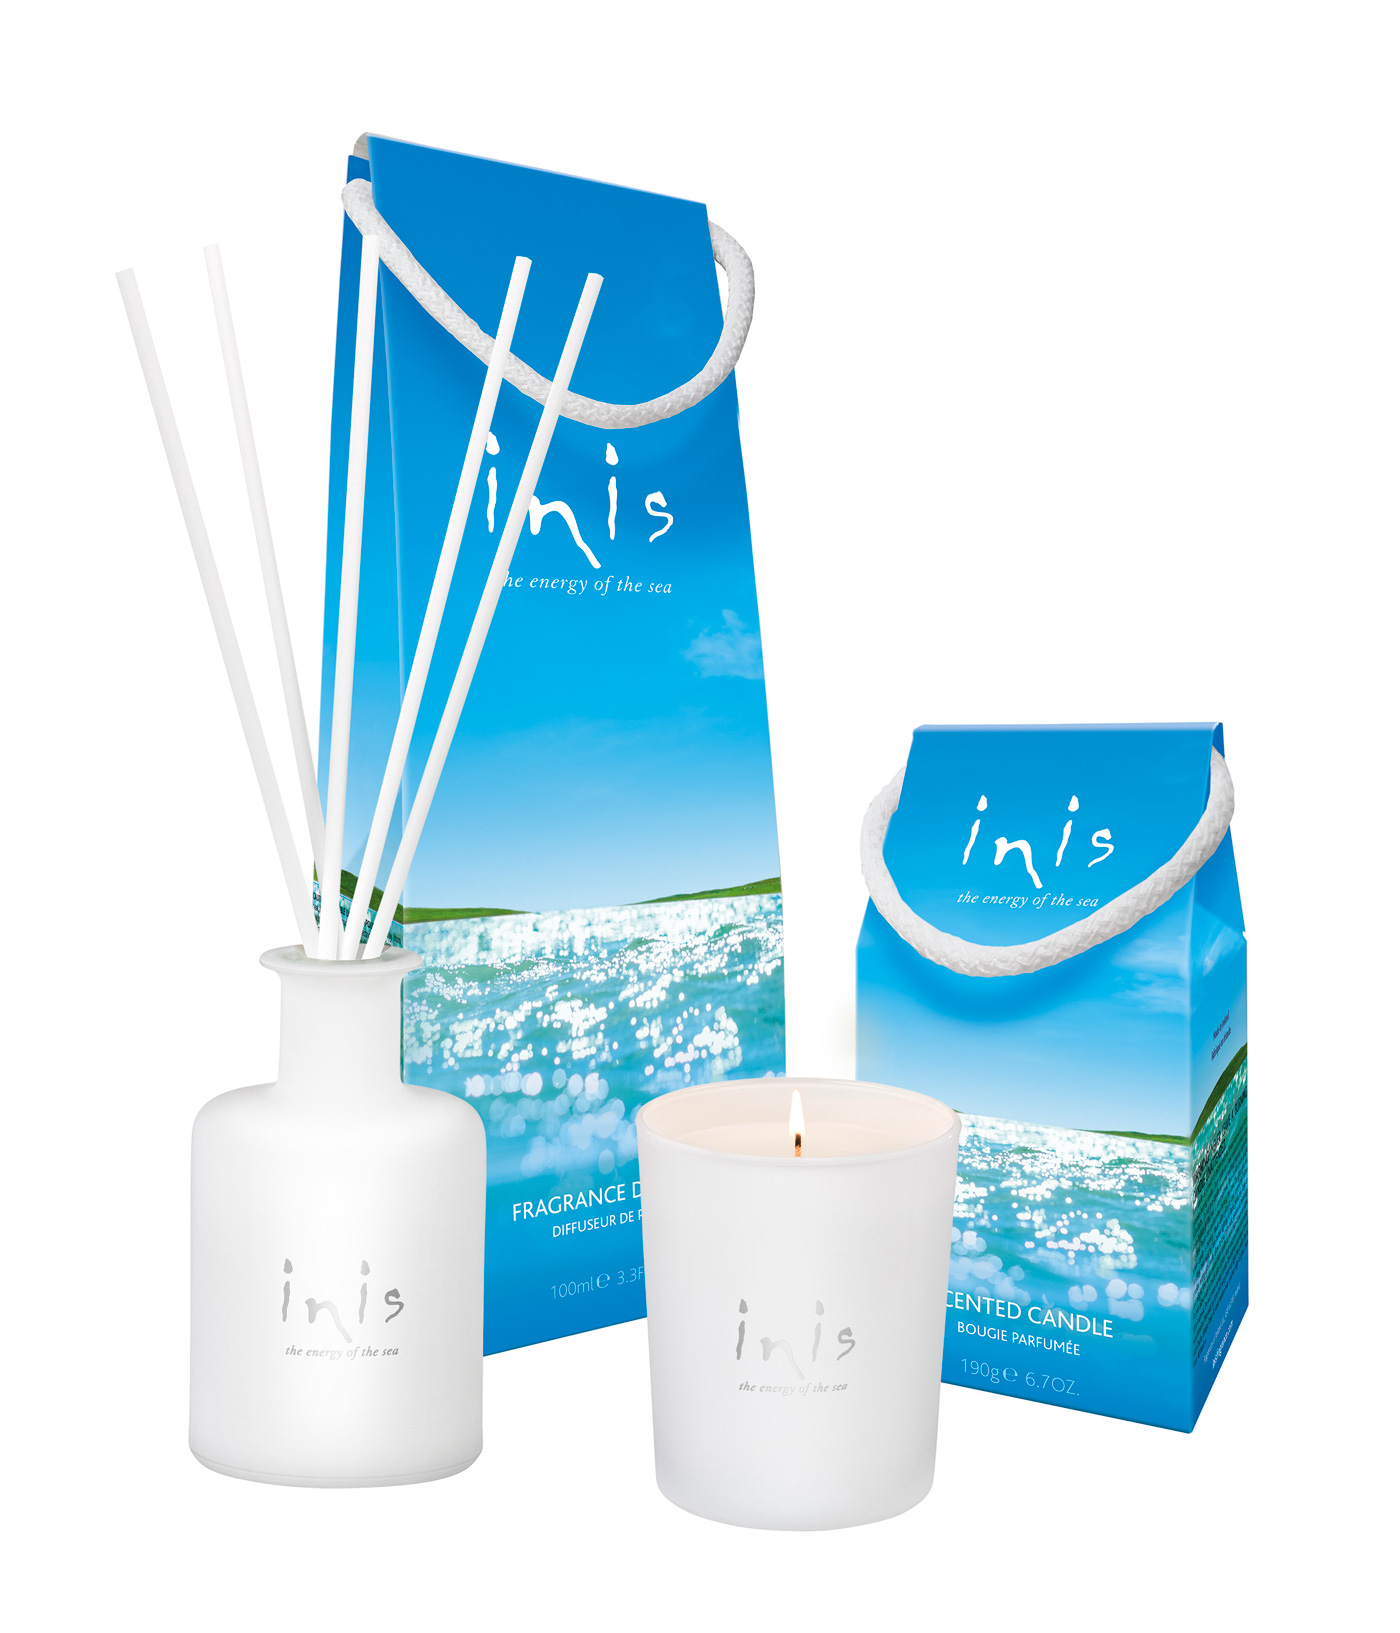 INIS Home Packaging Design Wicklow Ireland